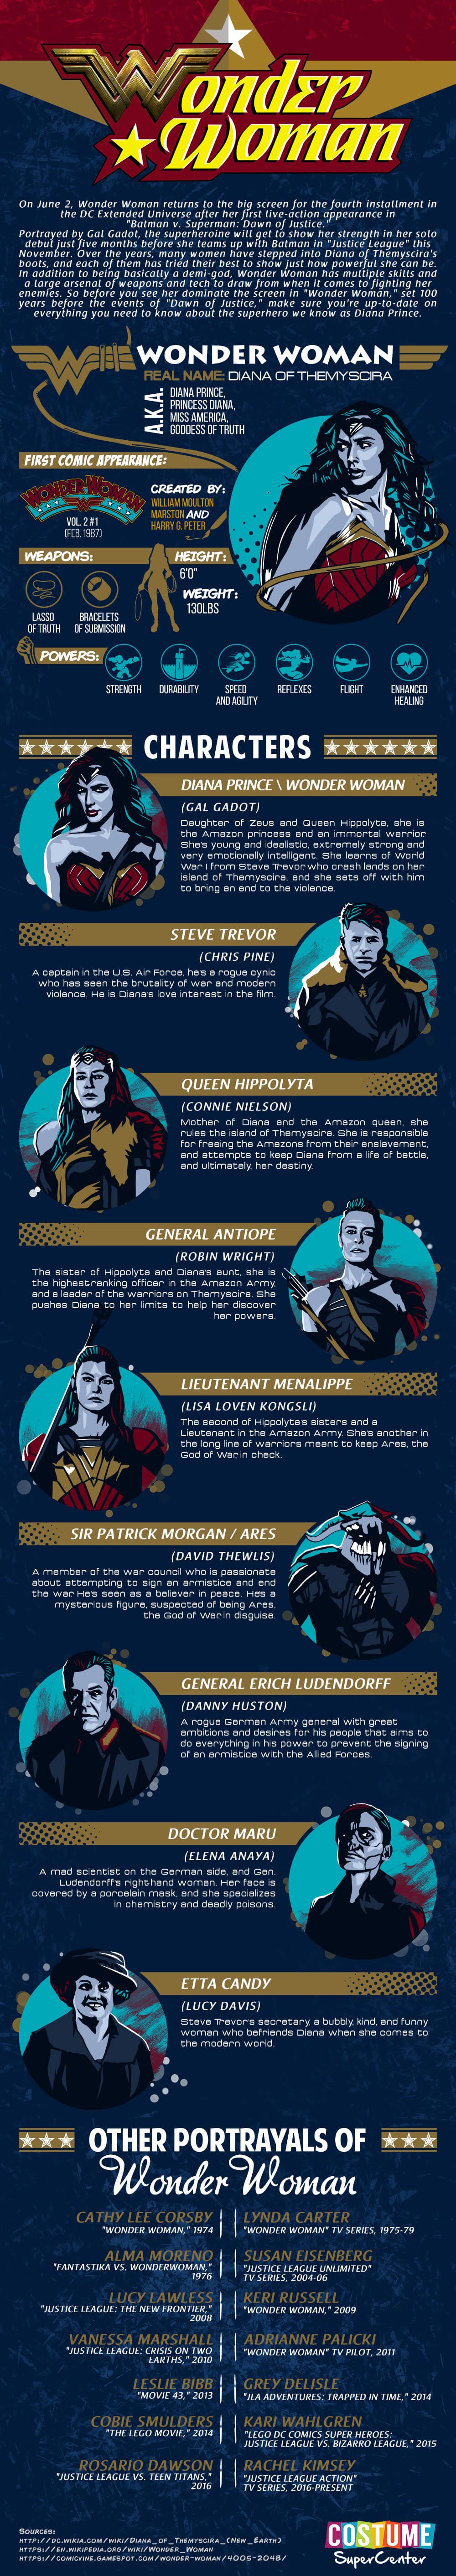 Wonder Woman Movie Character #infographic